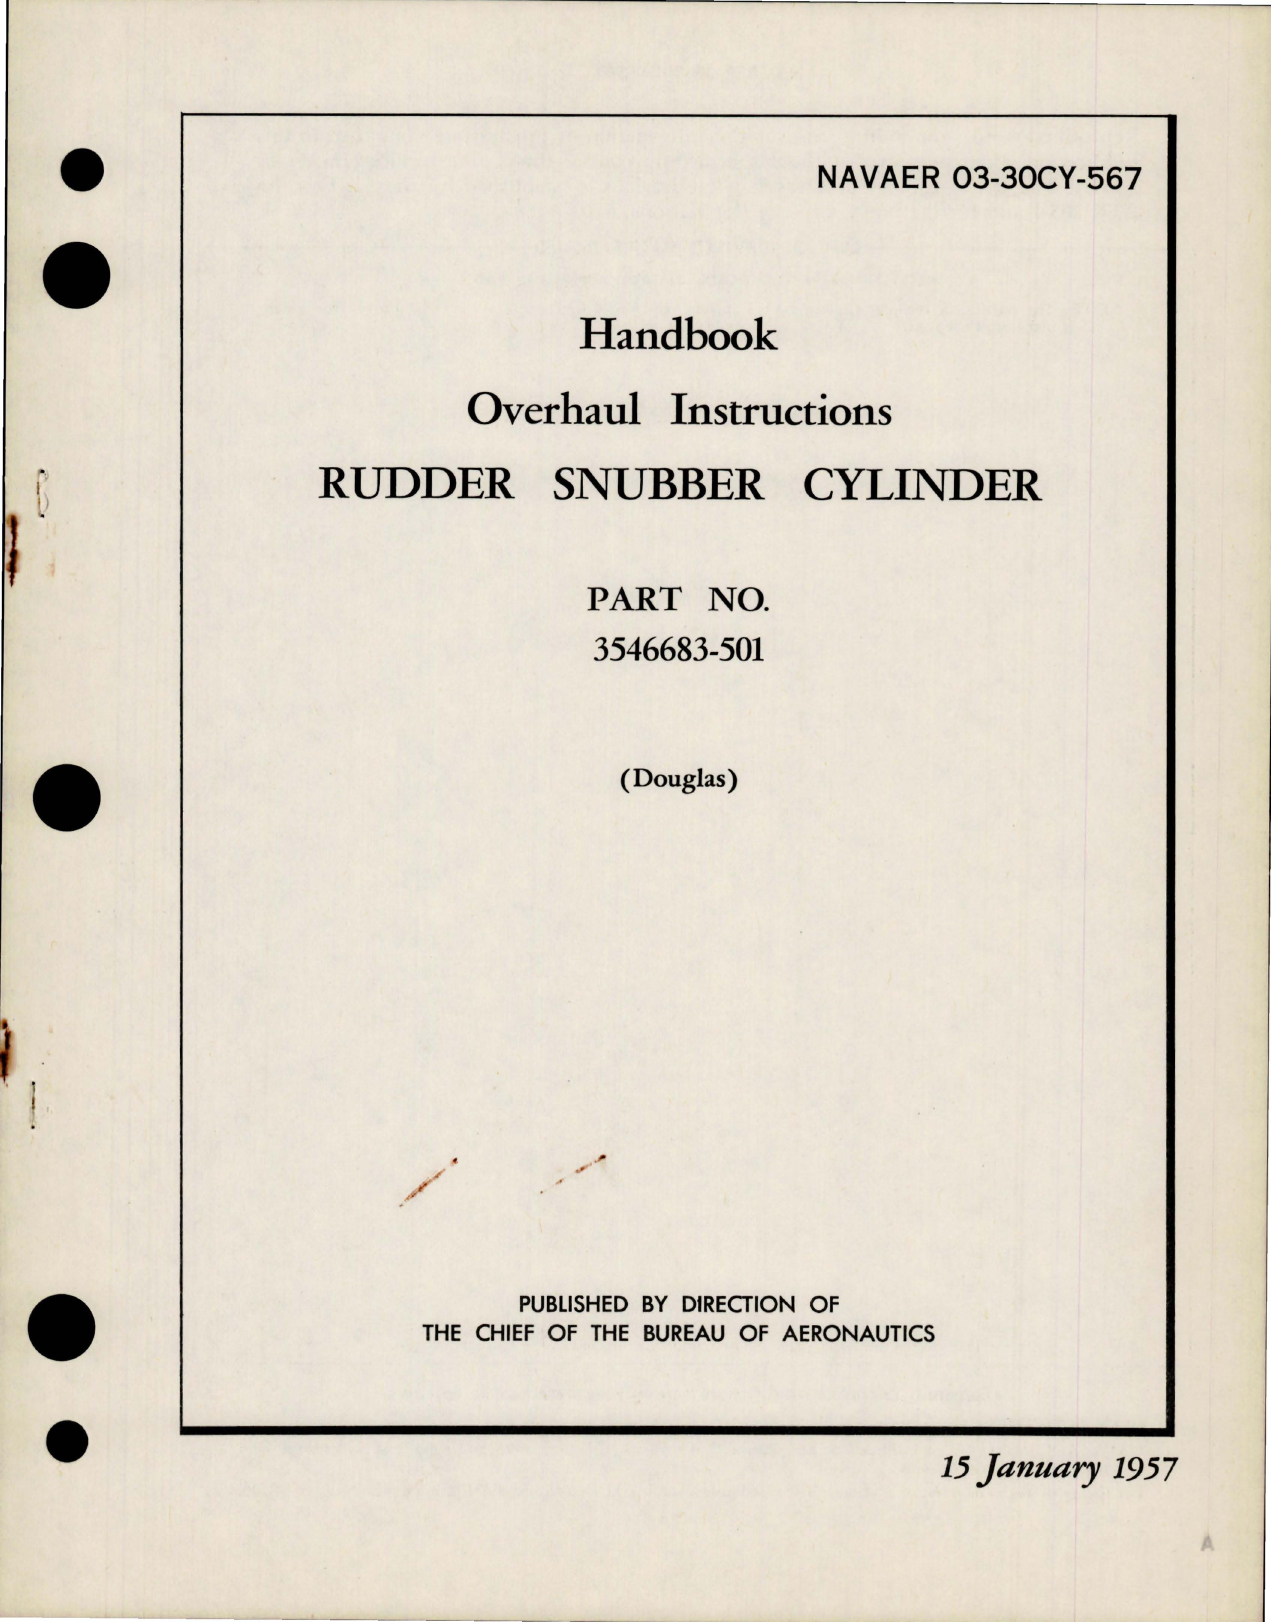 Sample page 1 from AirCorps Library document: Overhaul Instructions for Rudder Snubber Cylinder - Part 3546683-501